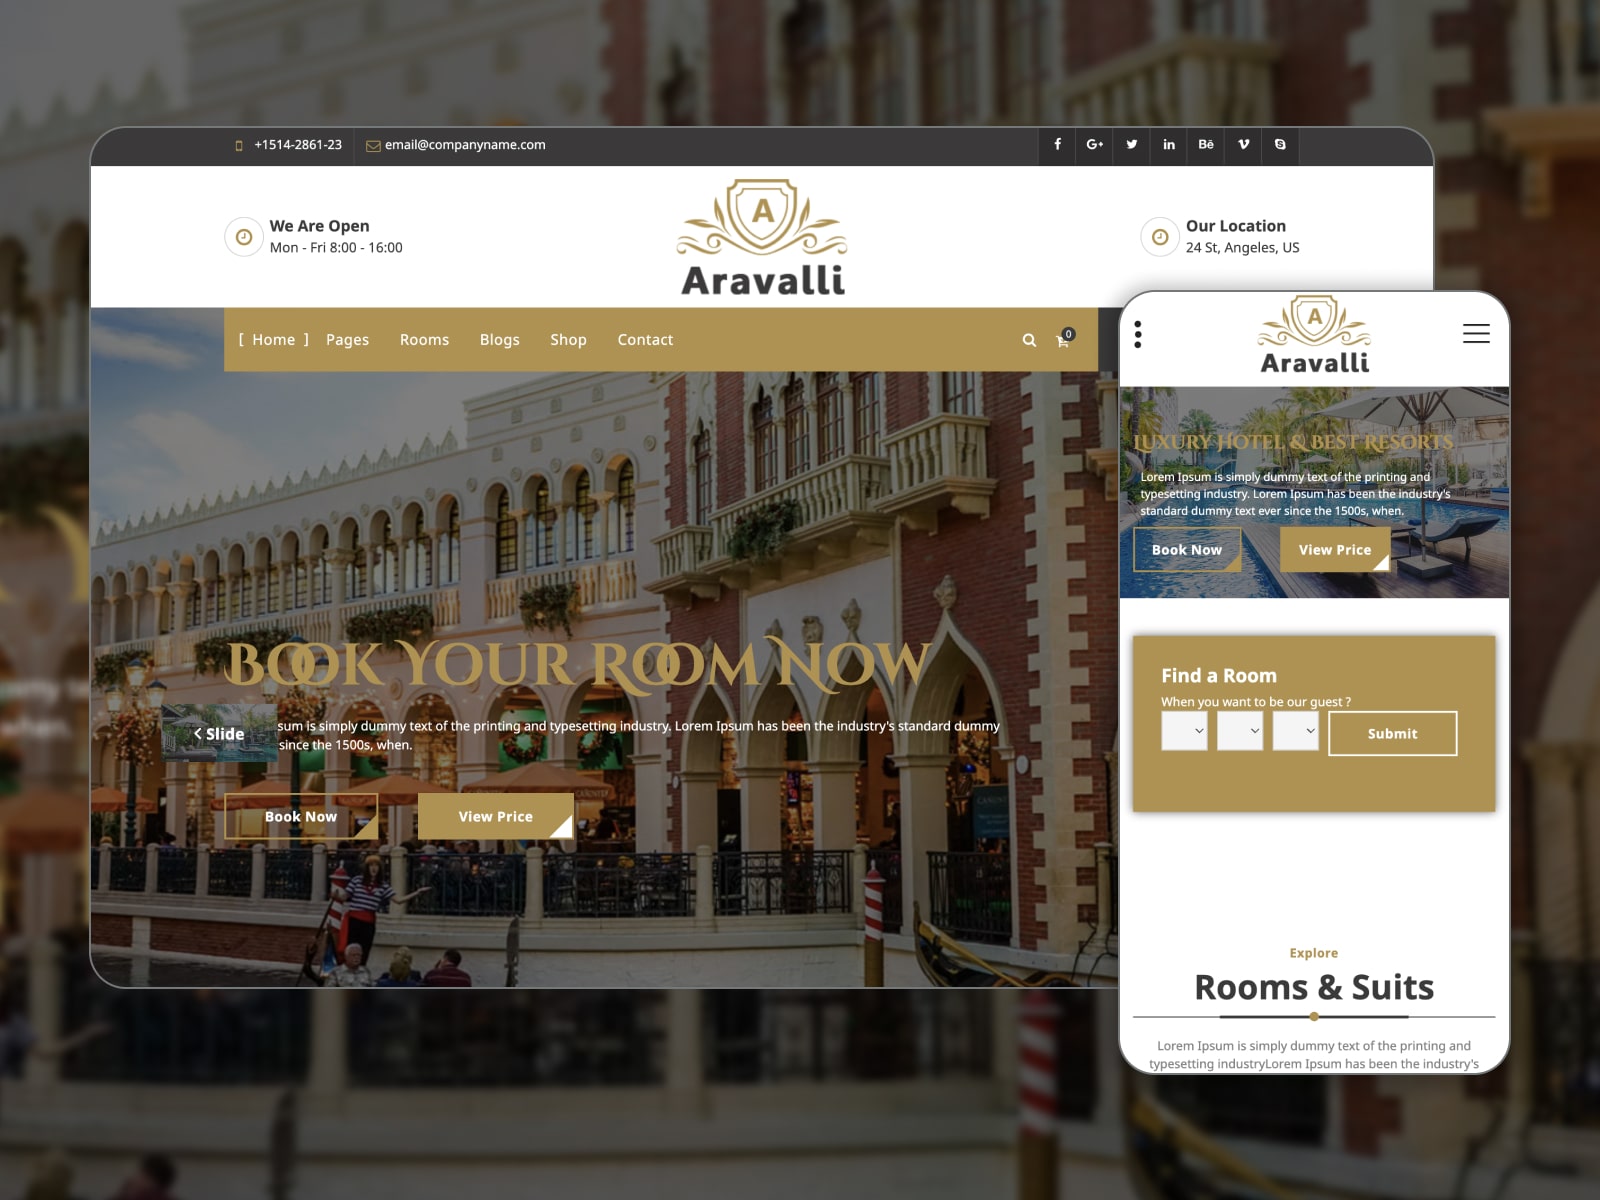 Collage of the Aravalli free theme demo page for WordPress websites in brown and white colors.